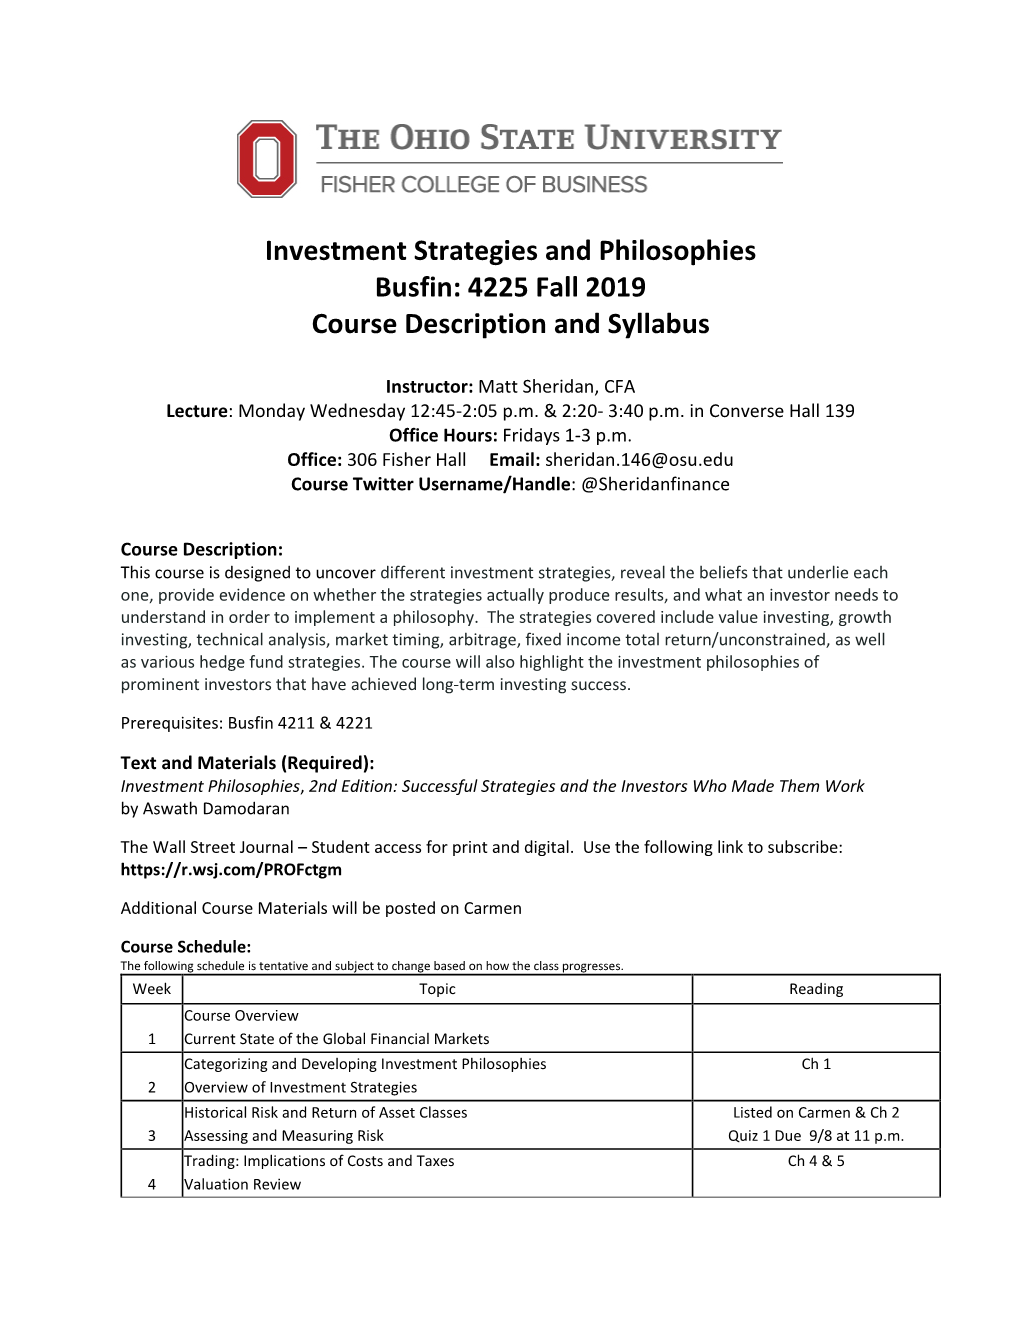 Investment Strategies and Philosophies Busfin: 4225 Fall 2019 Course Description and Syllabus